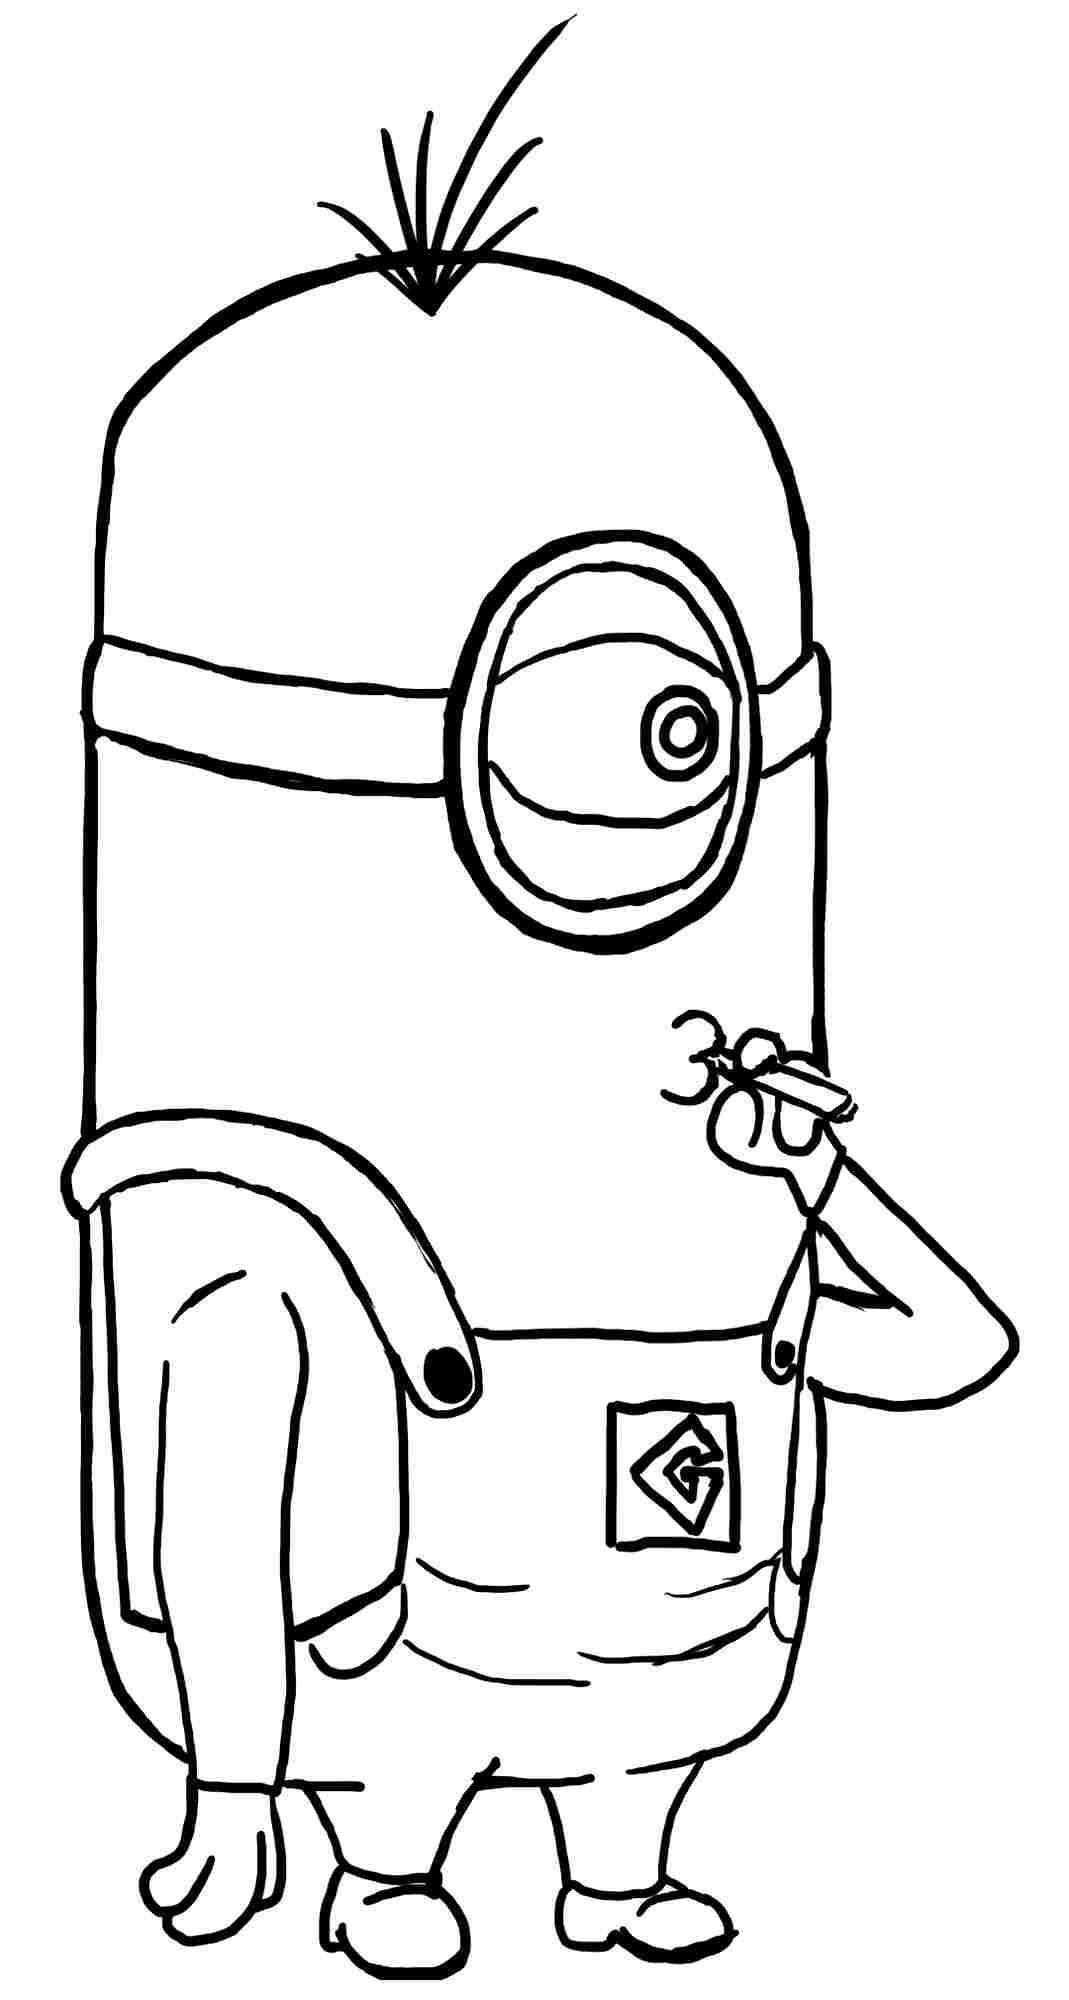 Coloring Pages Despicable Me Minion Anime Movie Printable Free For Coloring Books Min